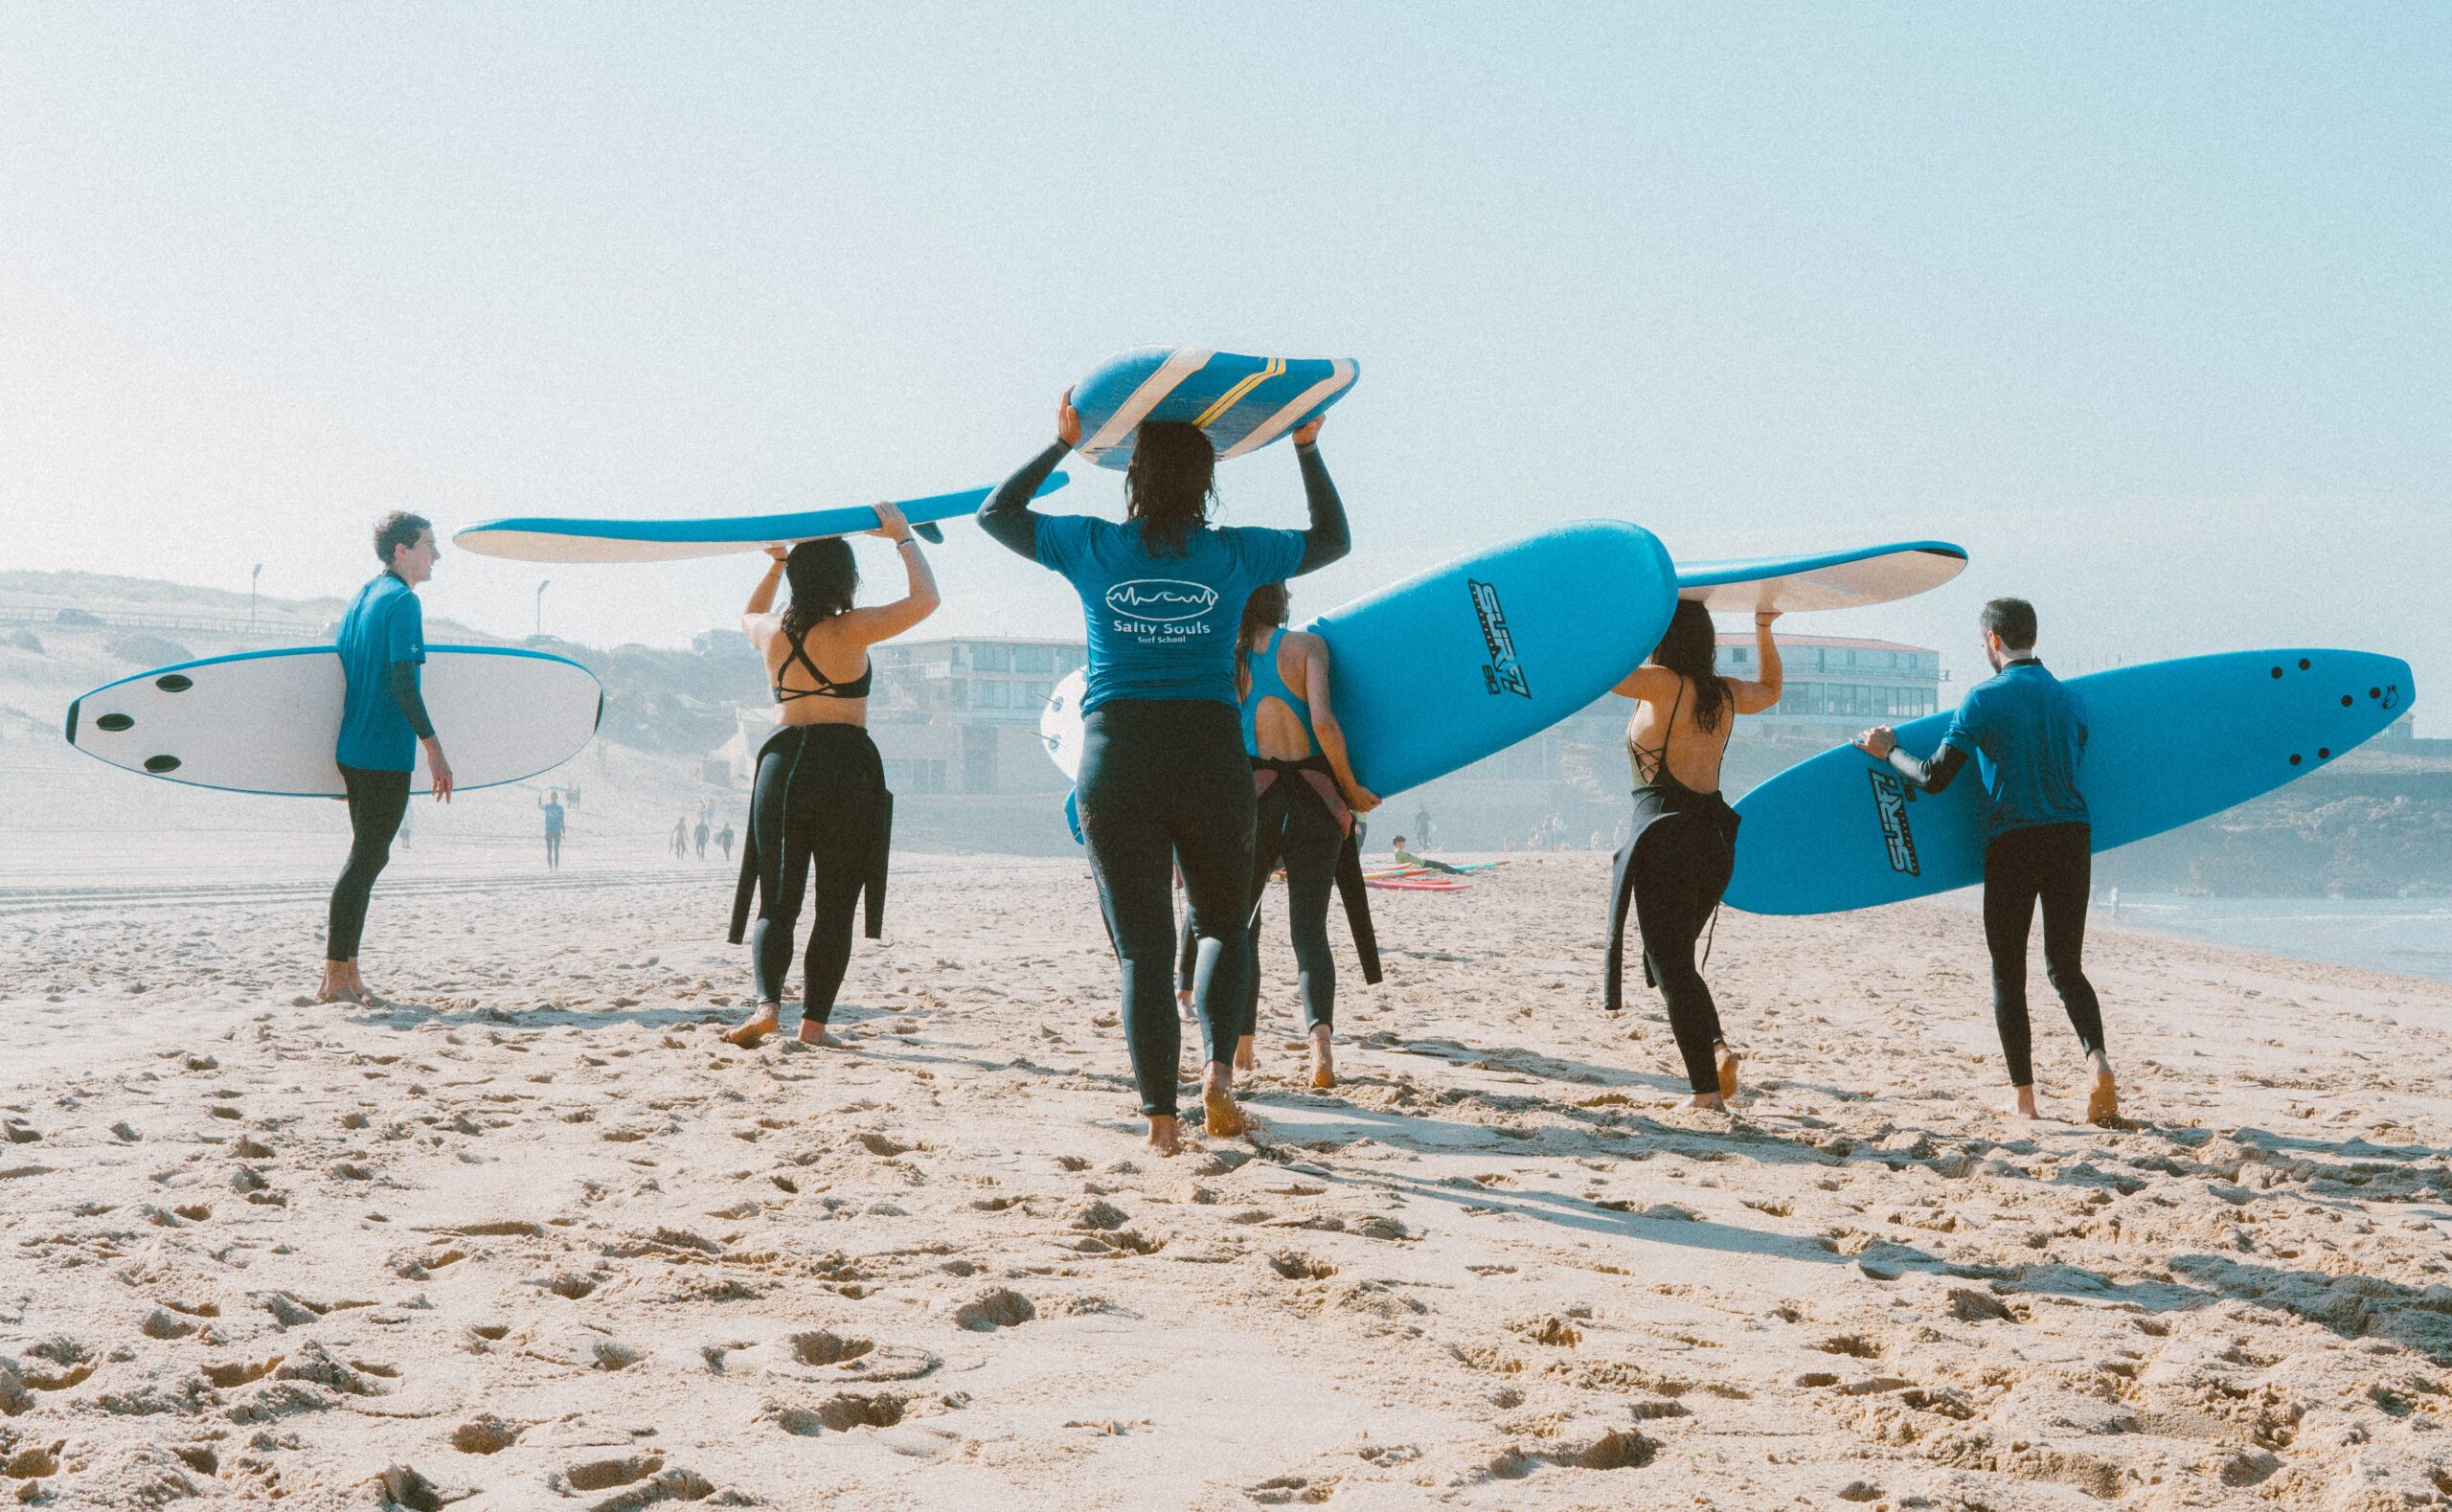 People are getting ready to go surfing at a newport california beach to represent 5 Best Non-Drinking Activities in Newport Beach and sober activities in newport beach.